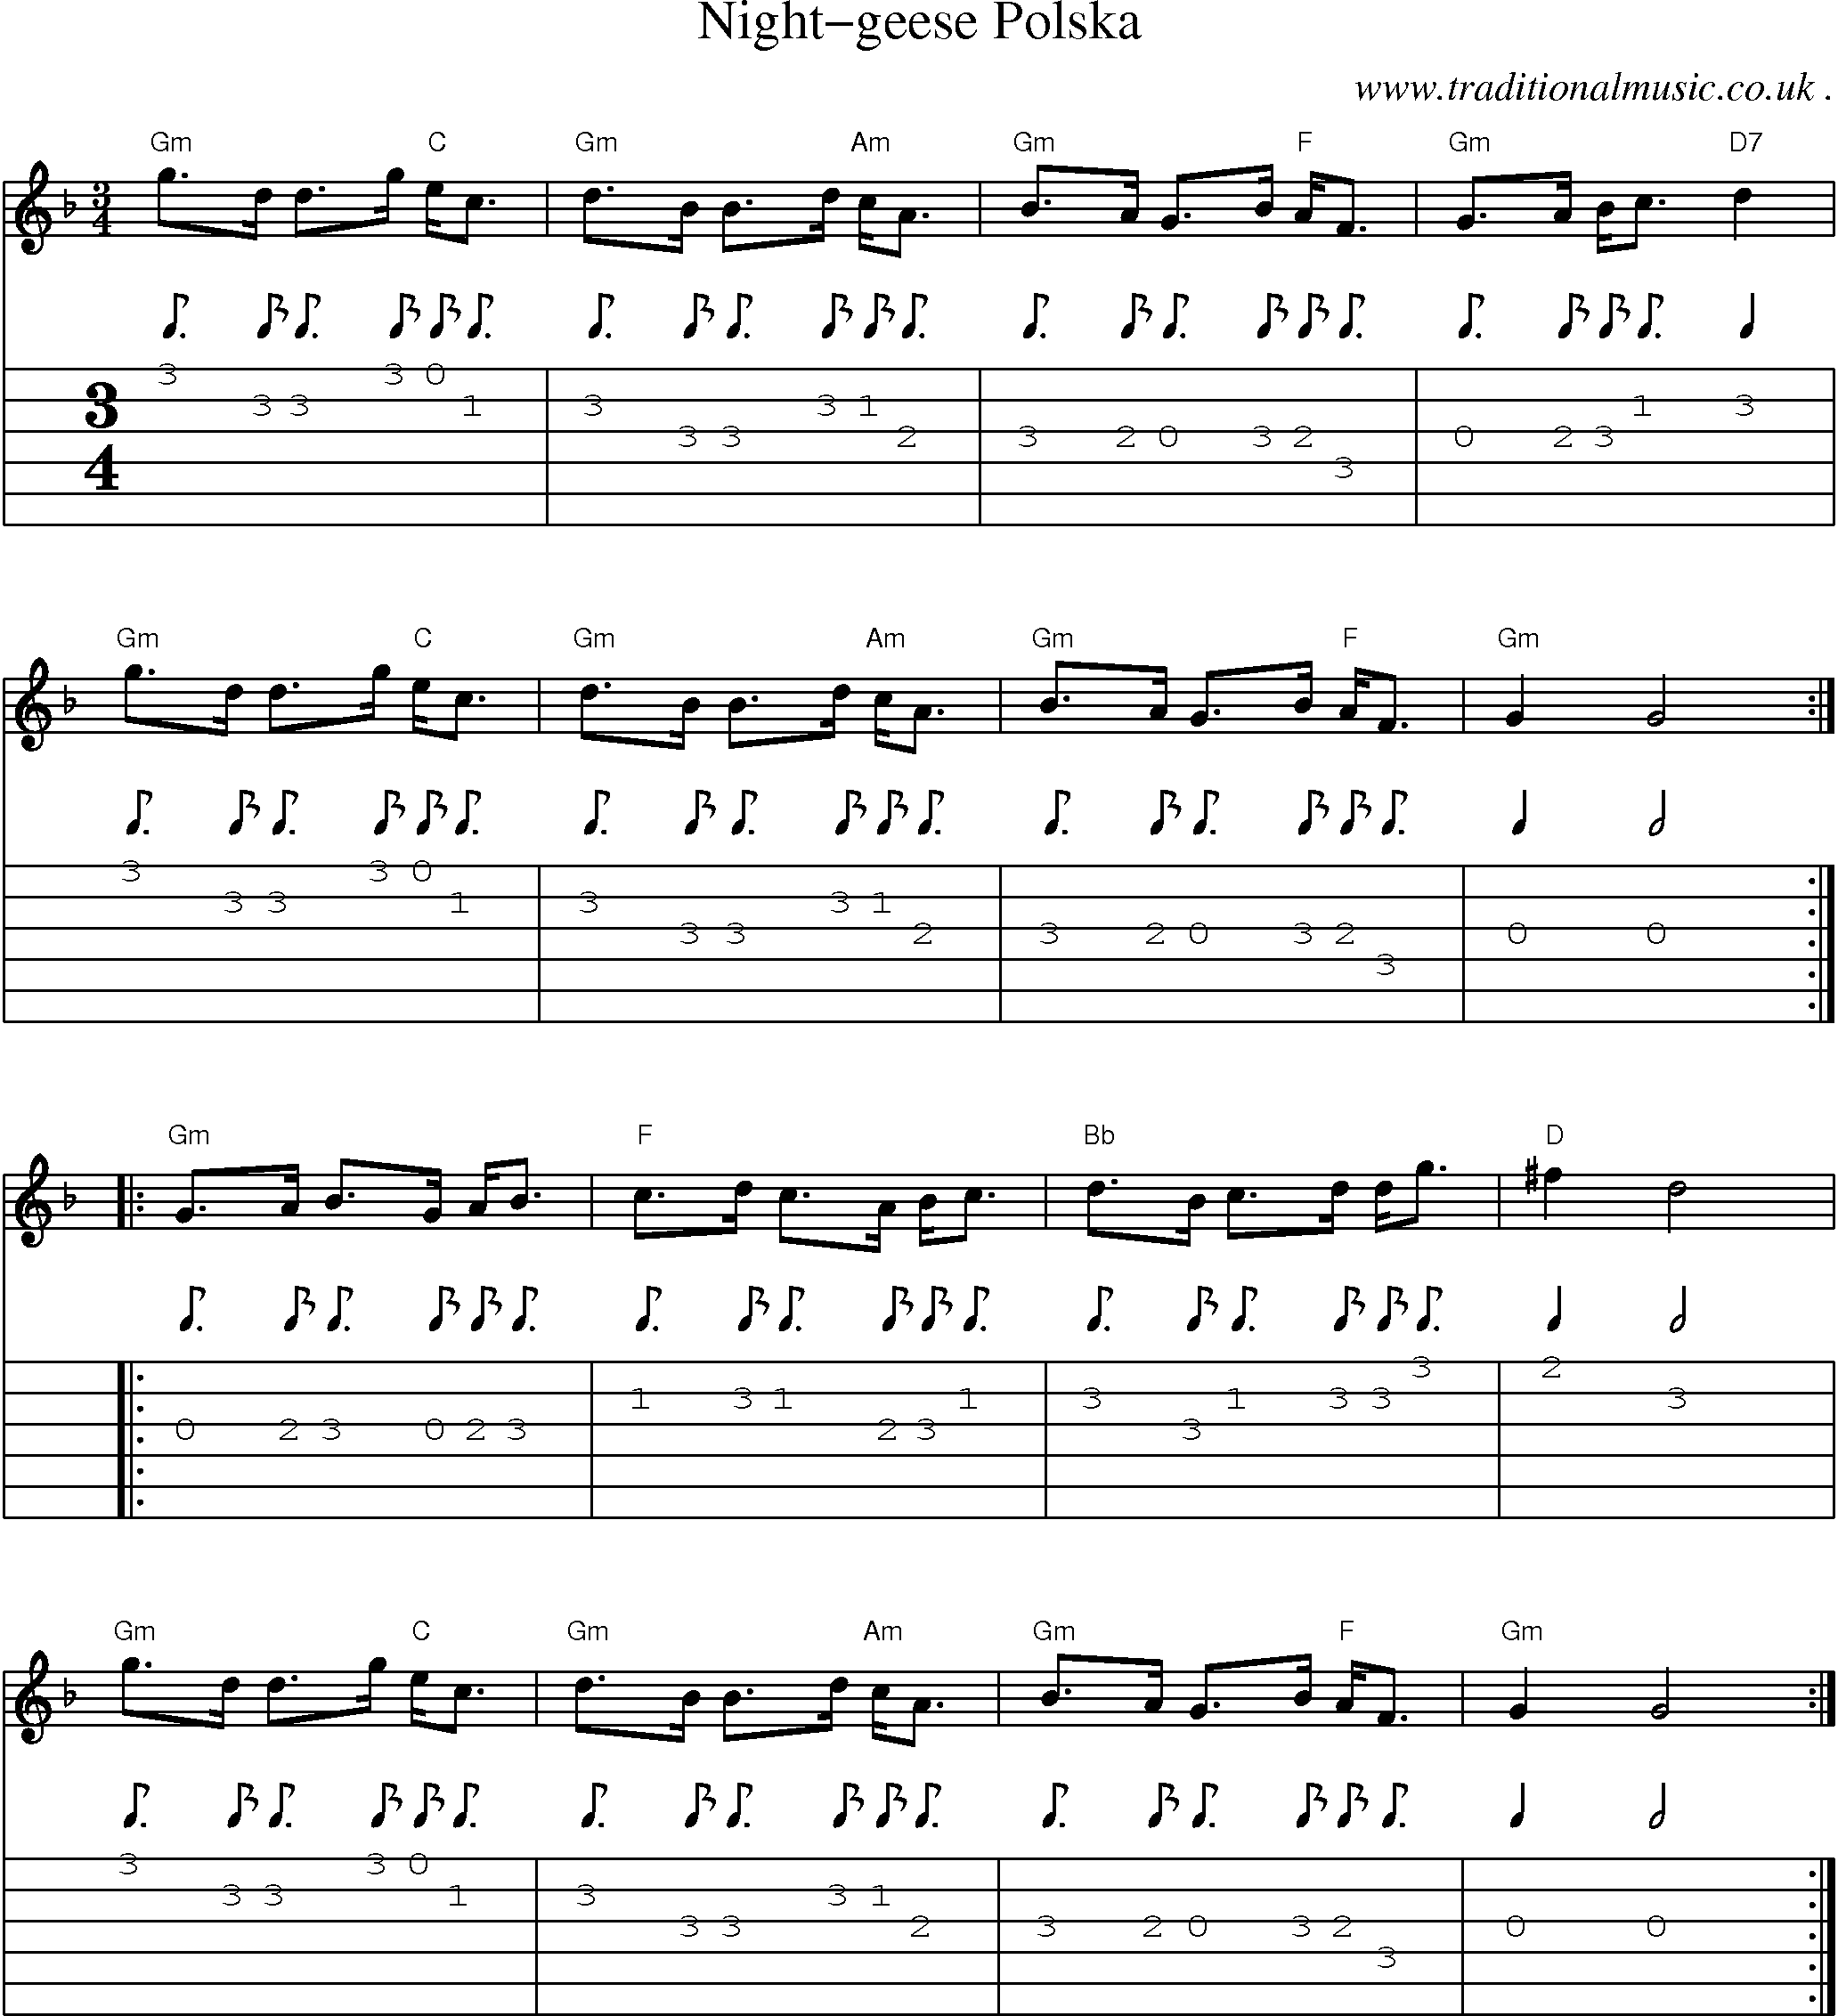 Music Score and Guitar Tabs for Night-geese Polska